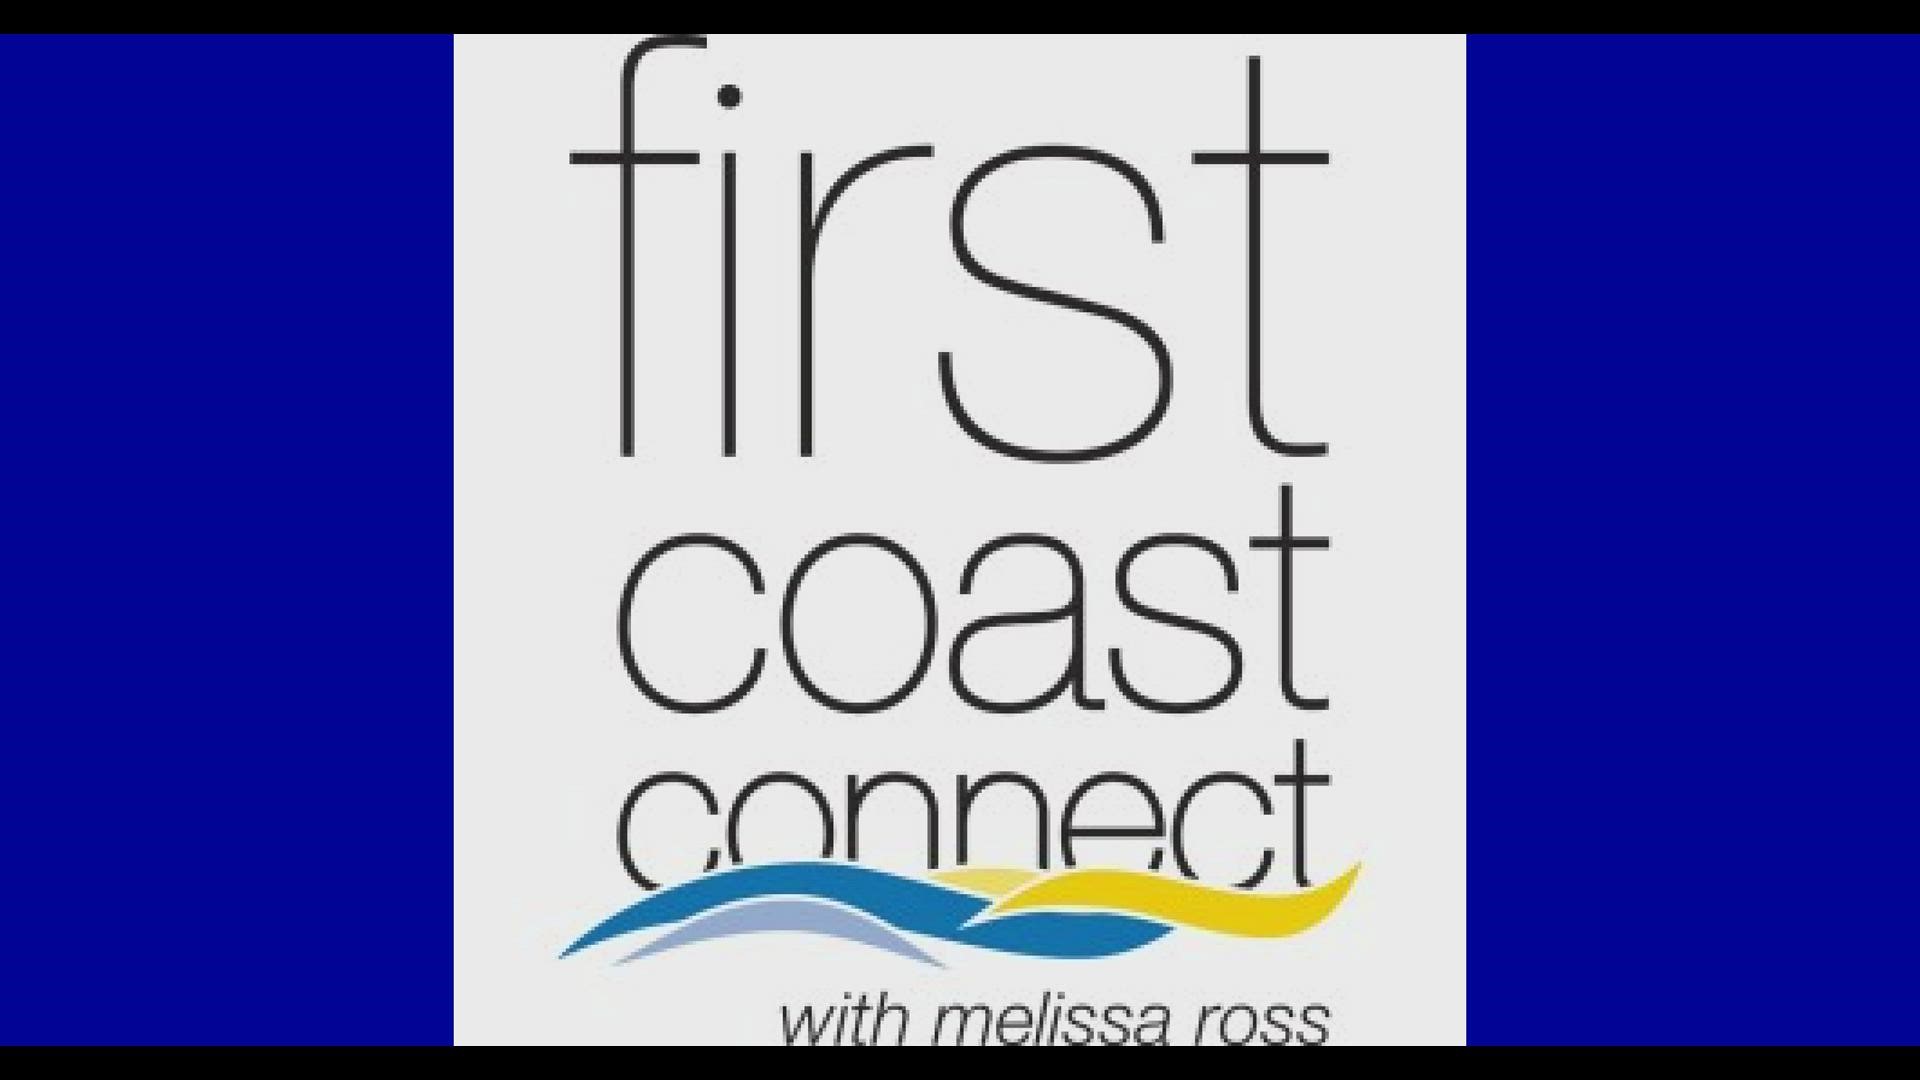 Ken Jefferson discusses sheriff race claims on First Coast Connect with Melissa Ross.